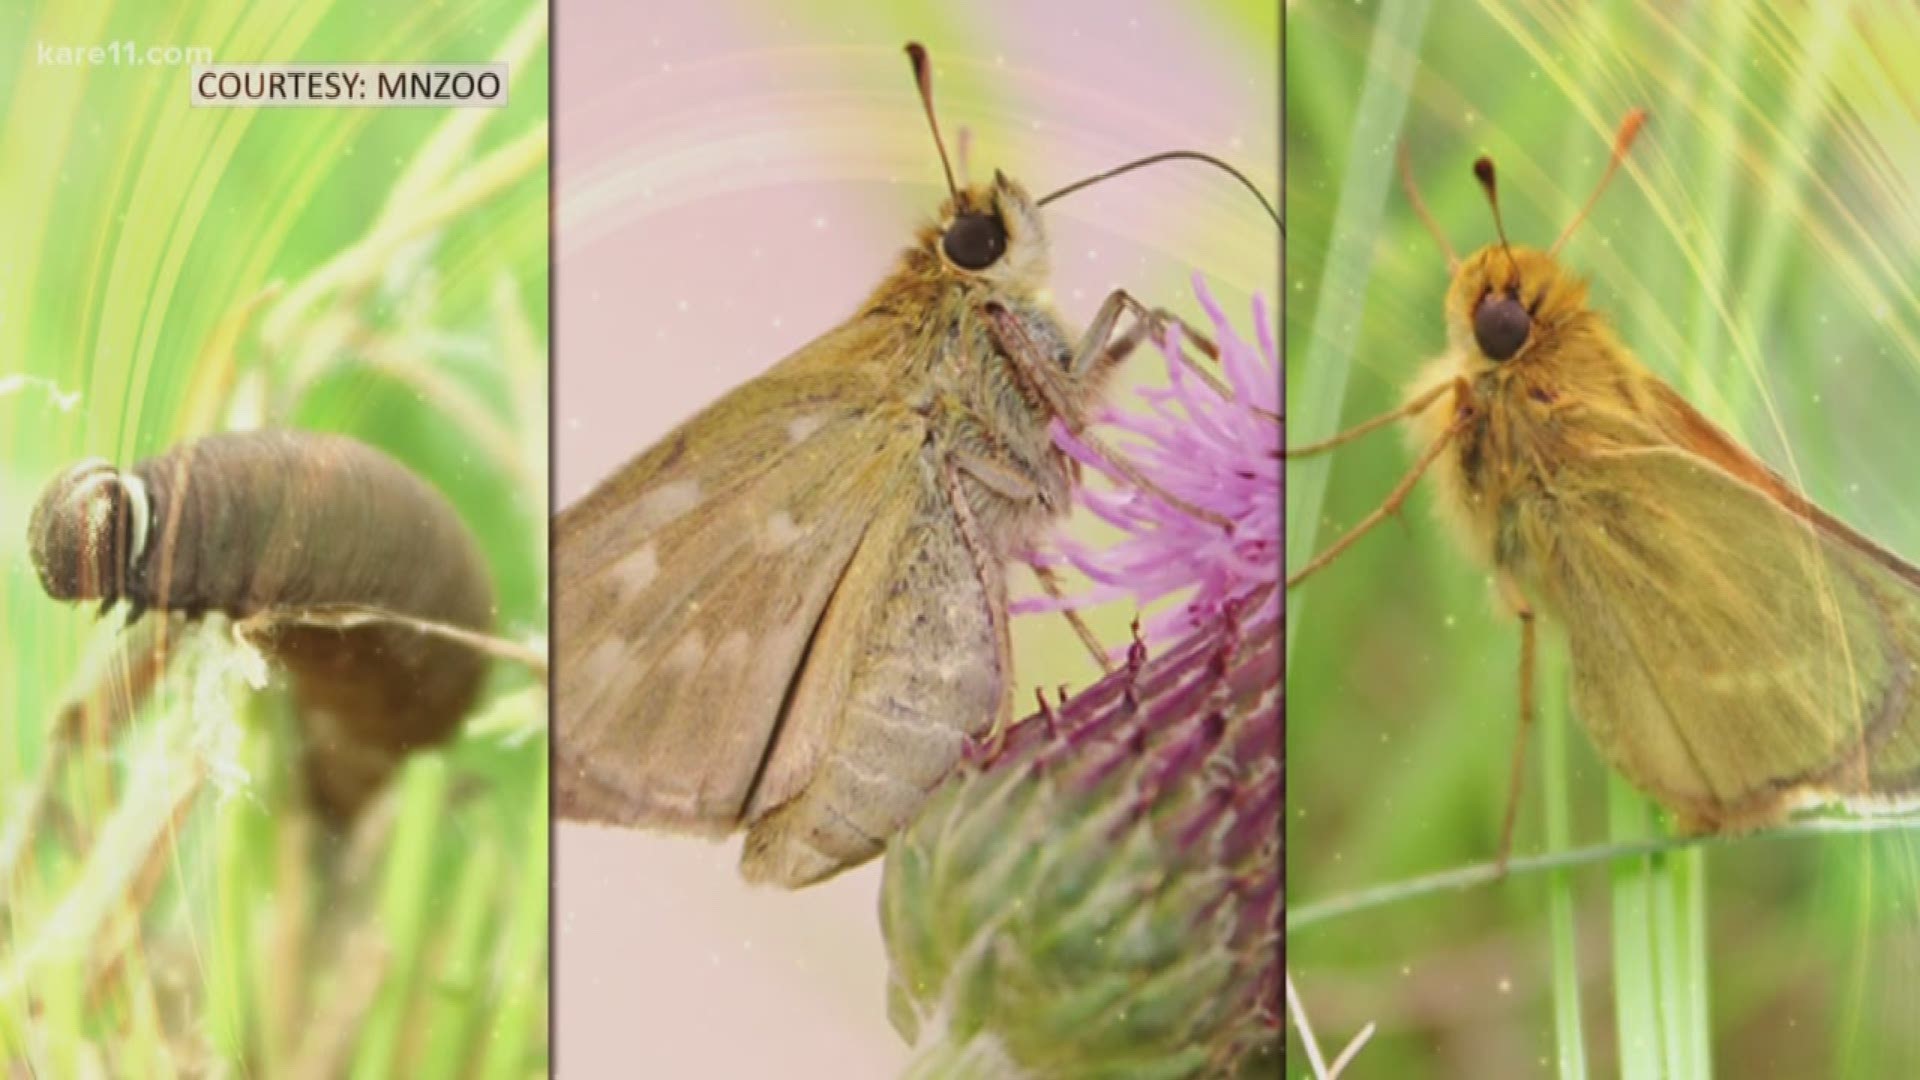 The Dakota Skipper butterfly is threatened in Minnesota. Sven Explains what's happening today at the Minnesota Zoo to help increase their numbers.